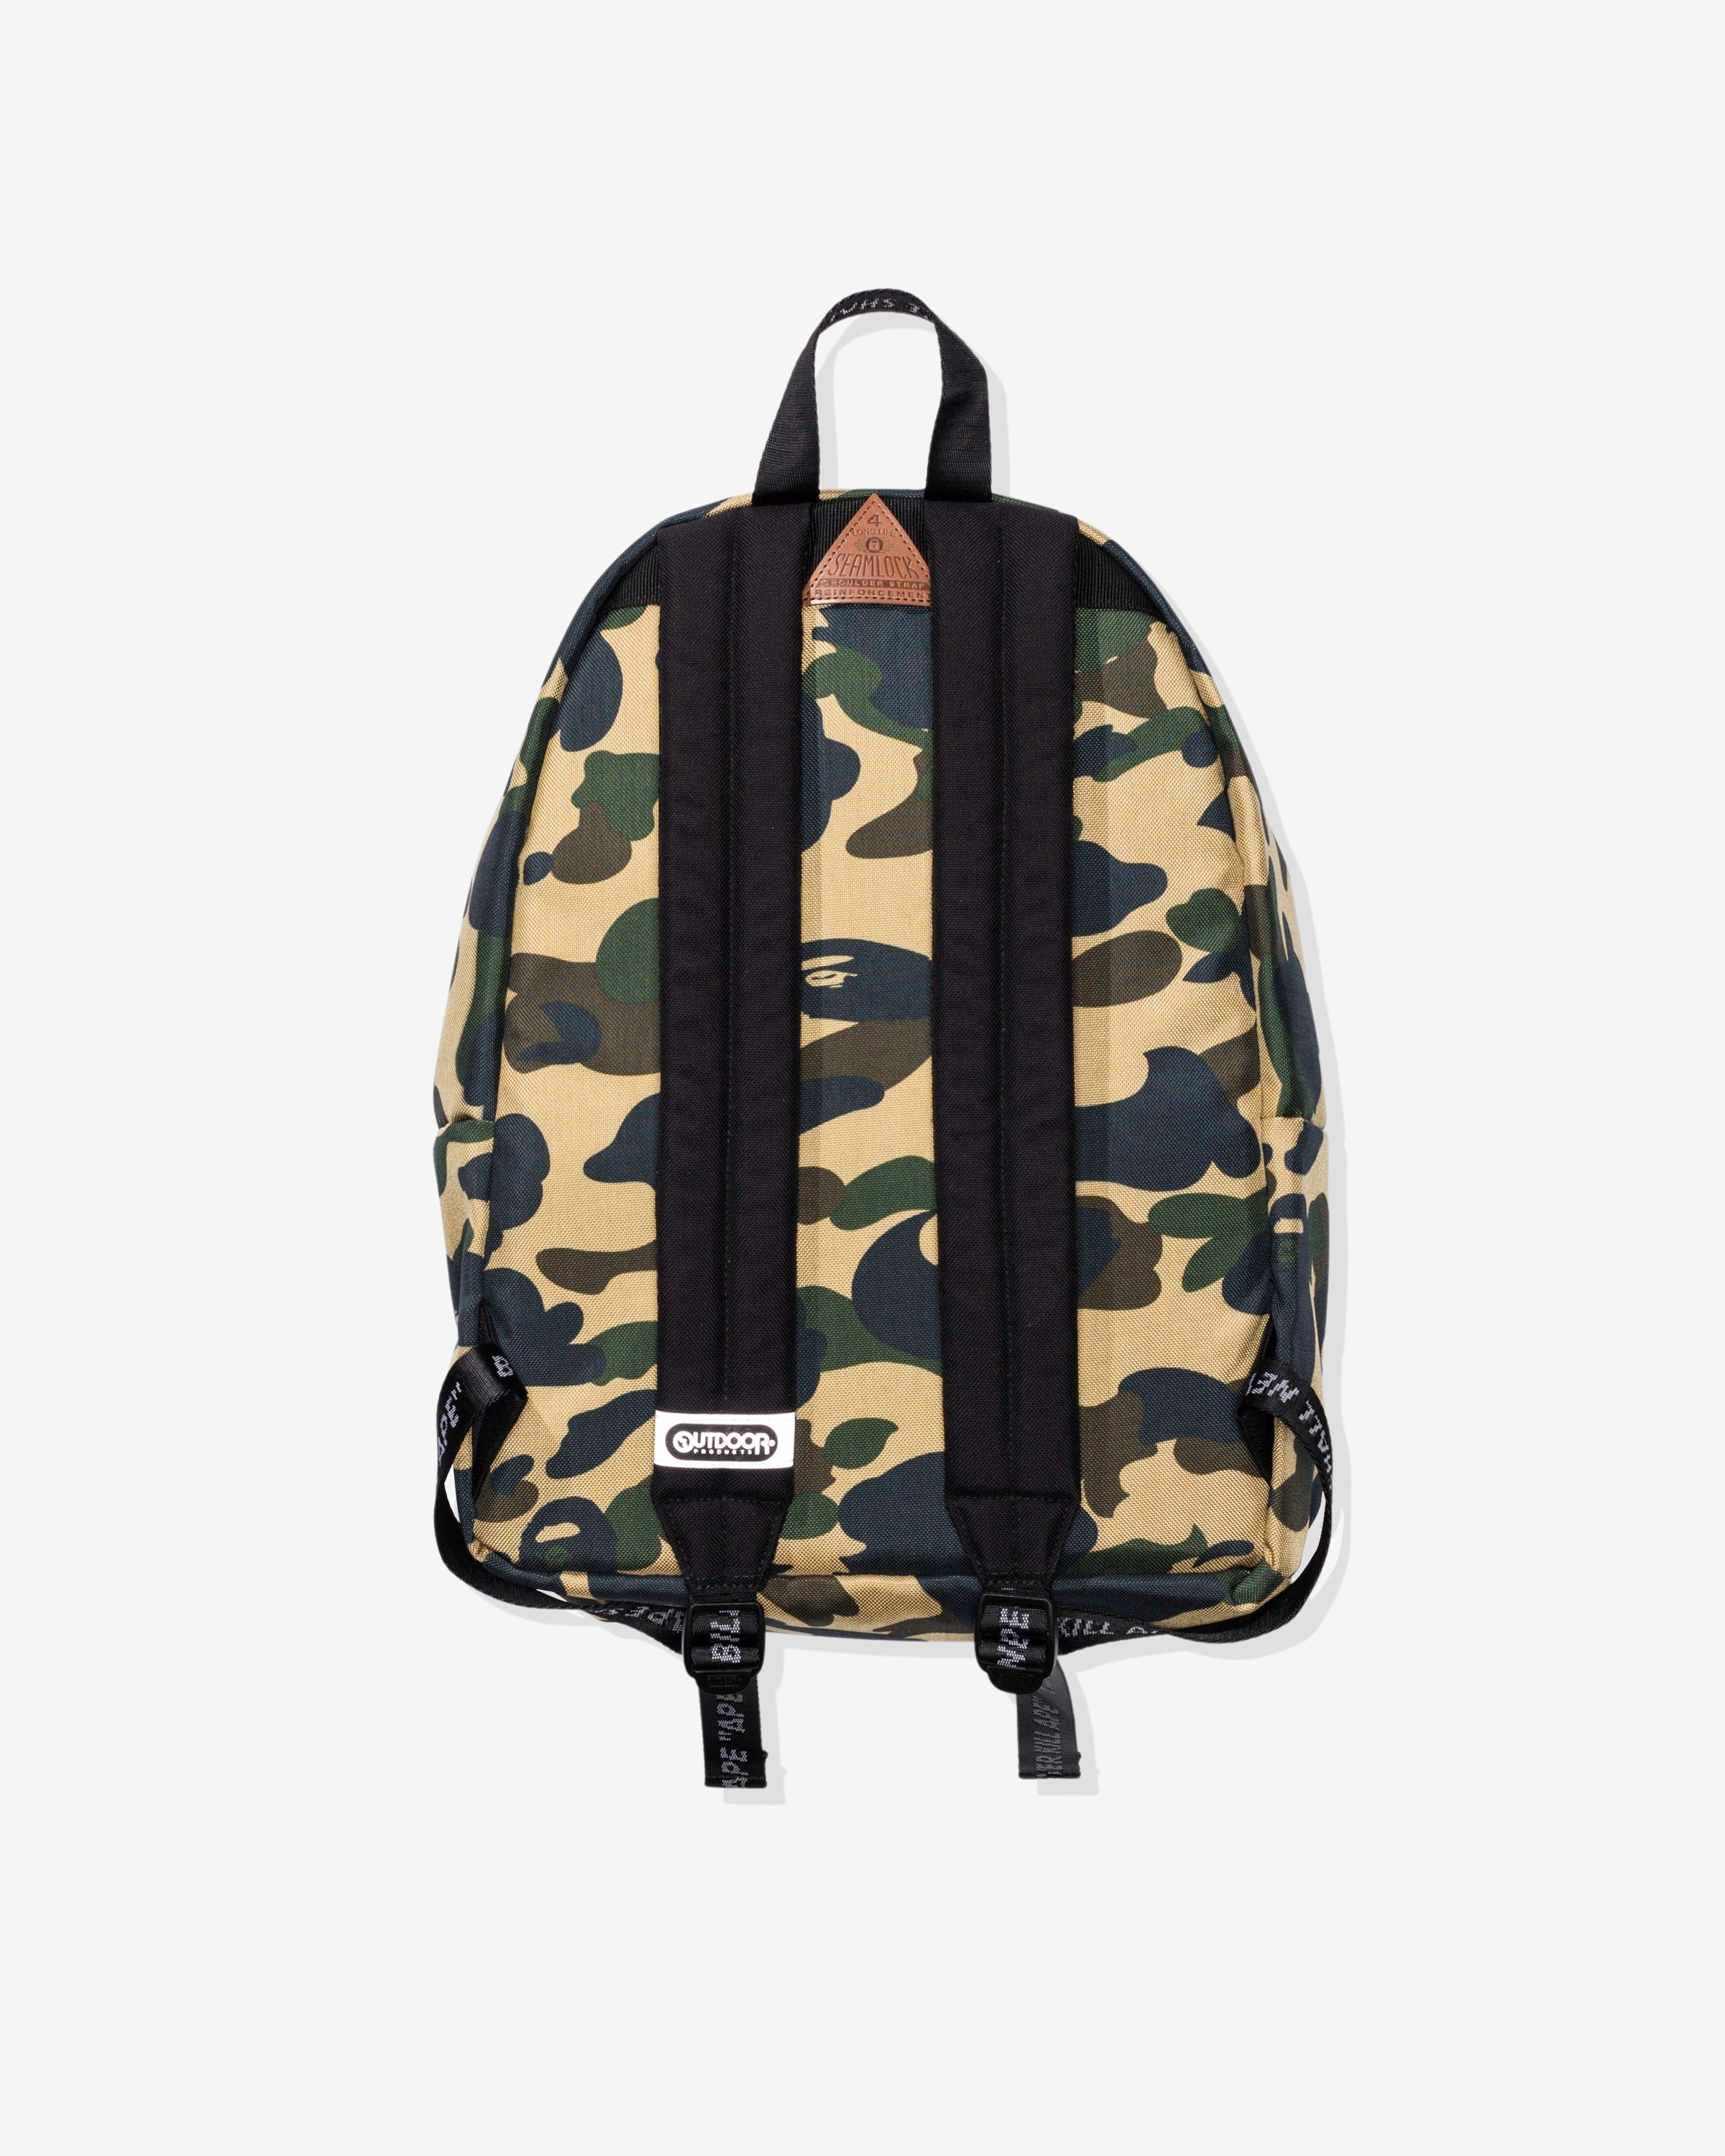 BAPE 1ST CAMO MILITARY SHOULDER BAG YELLOW SS19 - HealthdesignShops -  Backpack with water repellent DWR impregnation